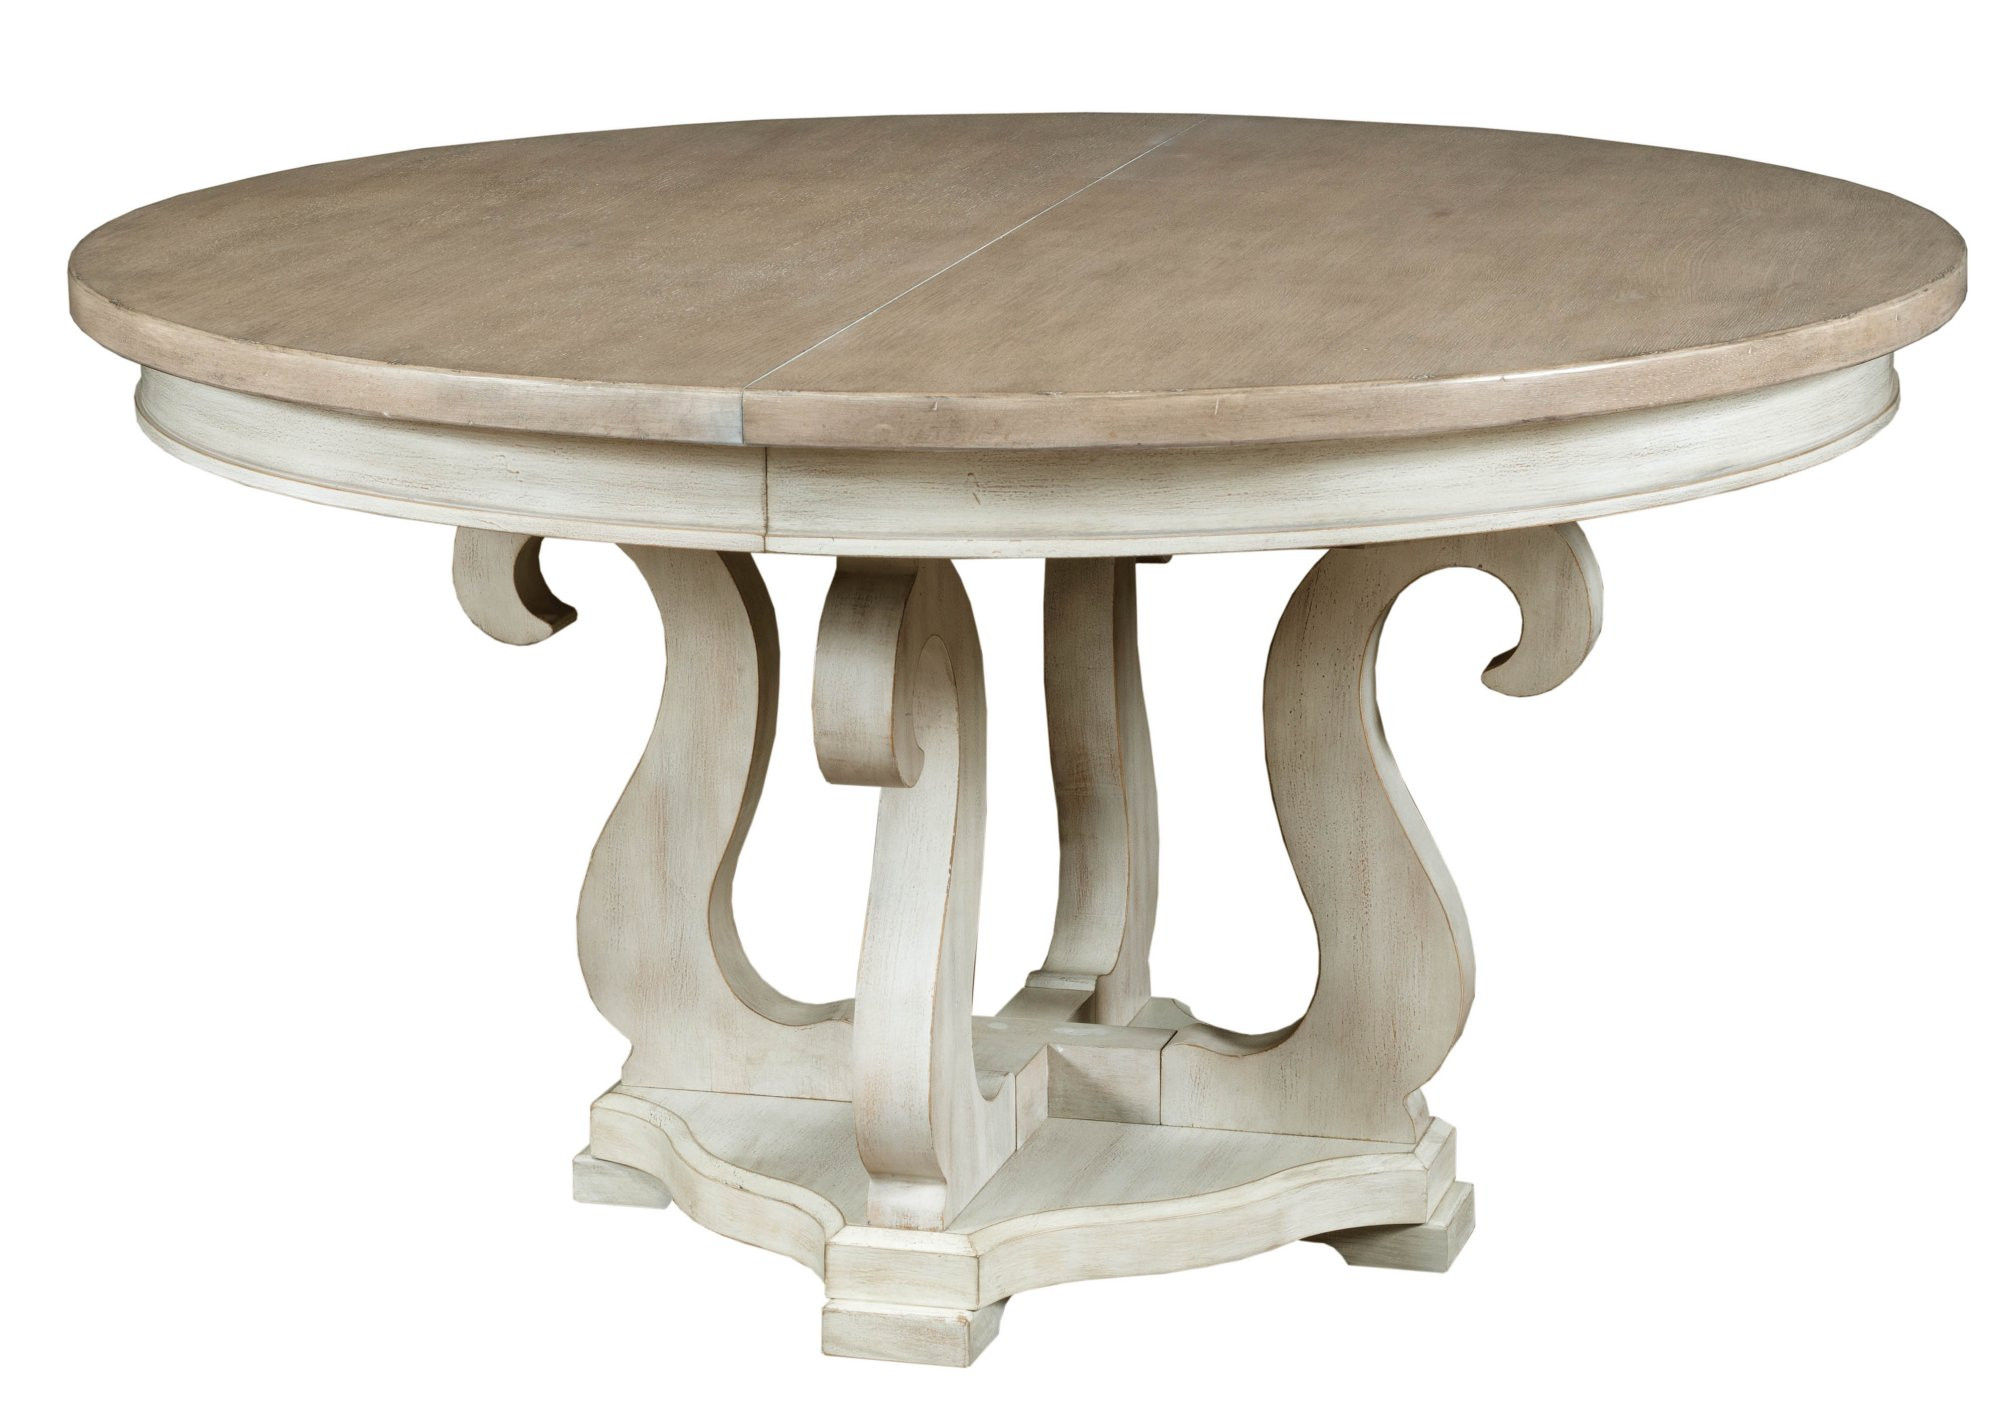 Sussex Round Dining Table w/ 1 20 Inch Leaf